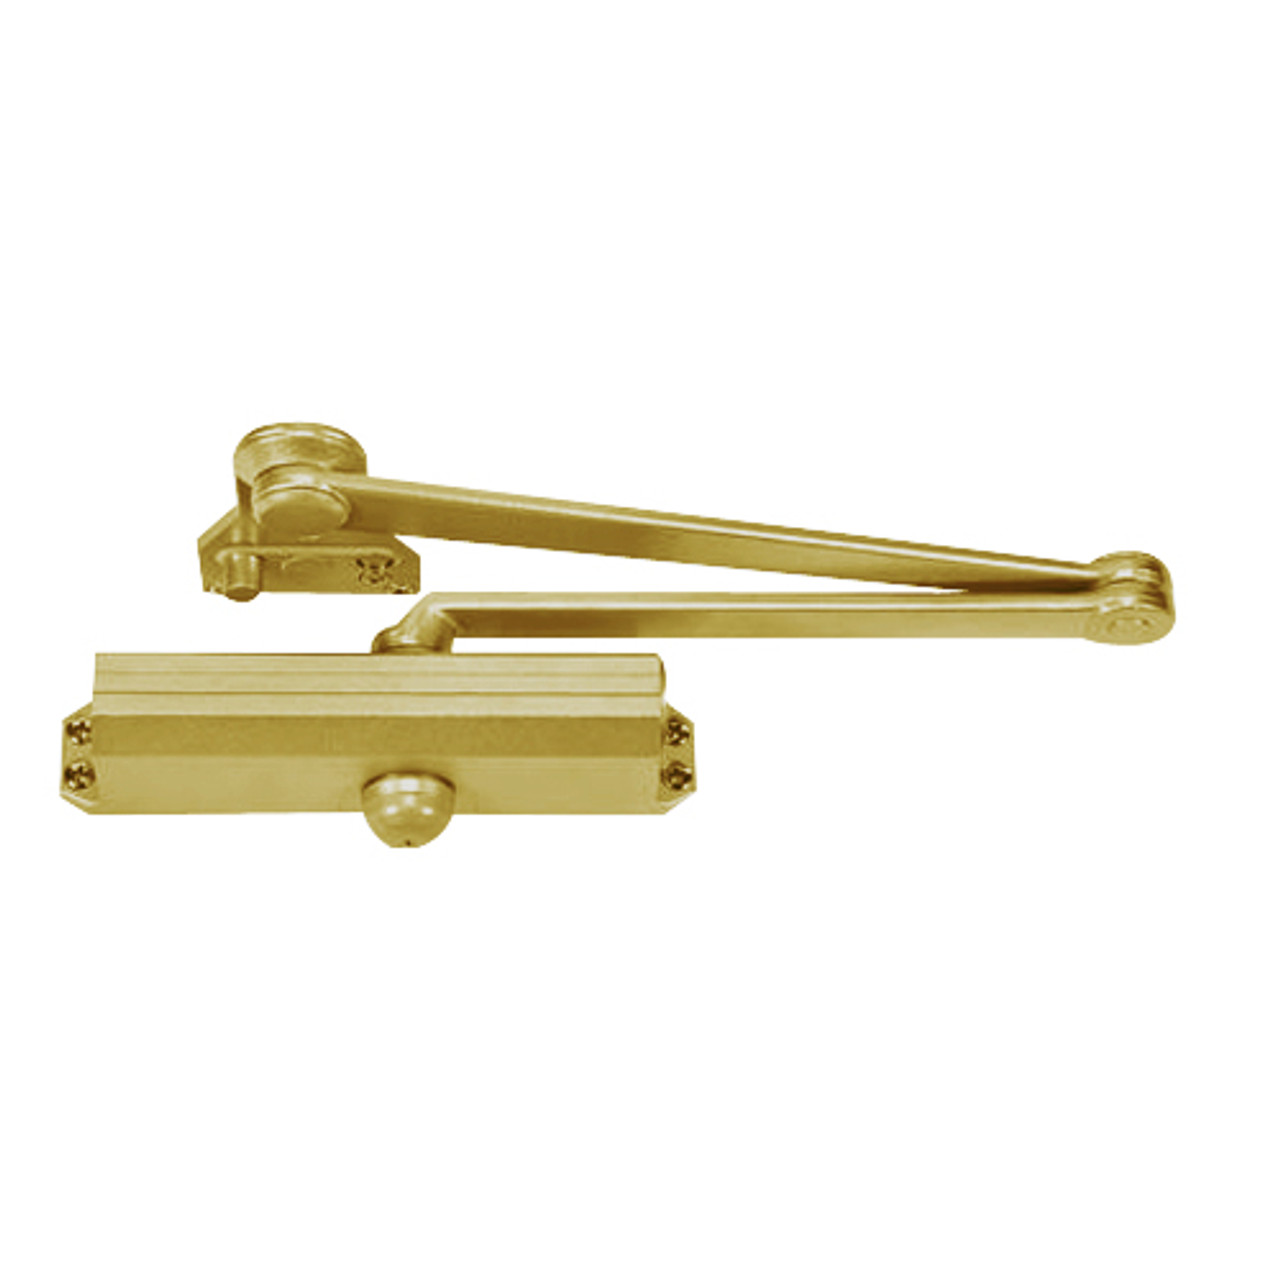 CPS1601-696 Norton 1600 Series Non Hold Open Adjustable Door Closer with CloserPlus Spring Arm in Satin Brass Painted Finish